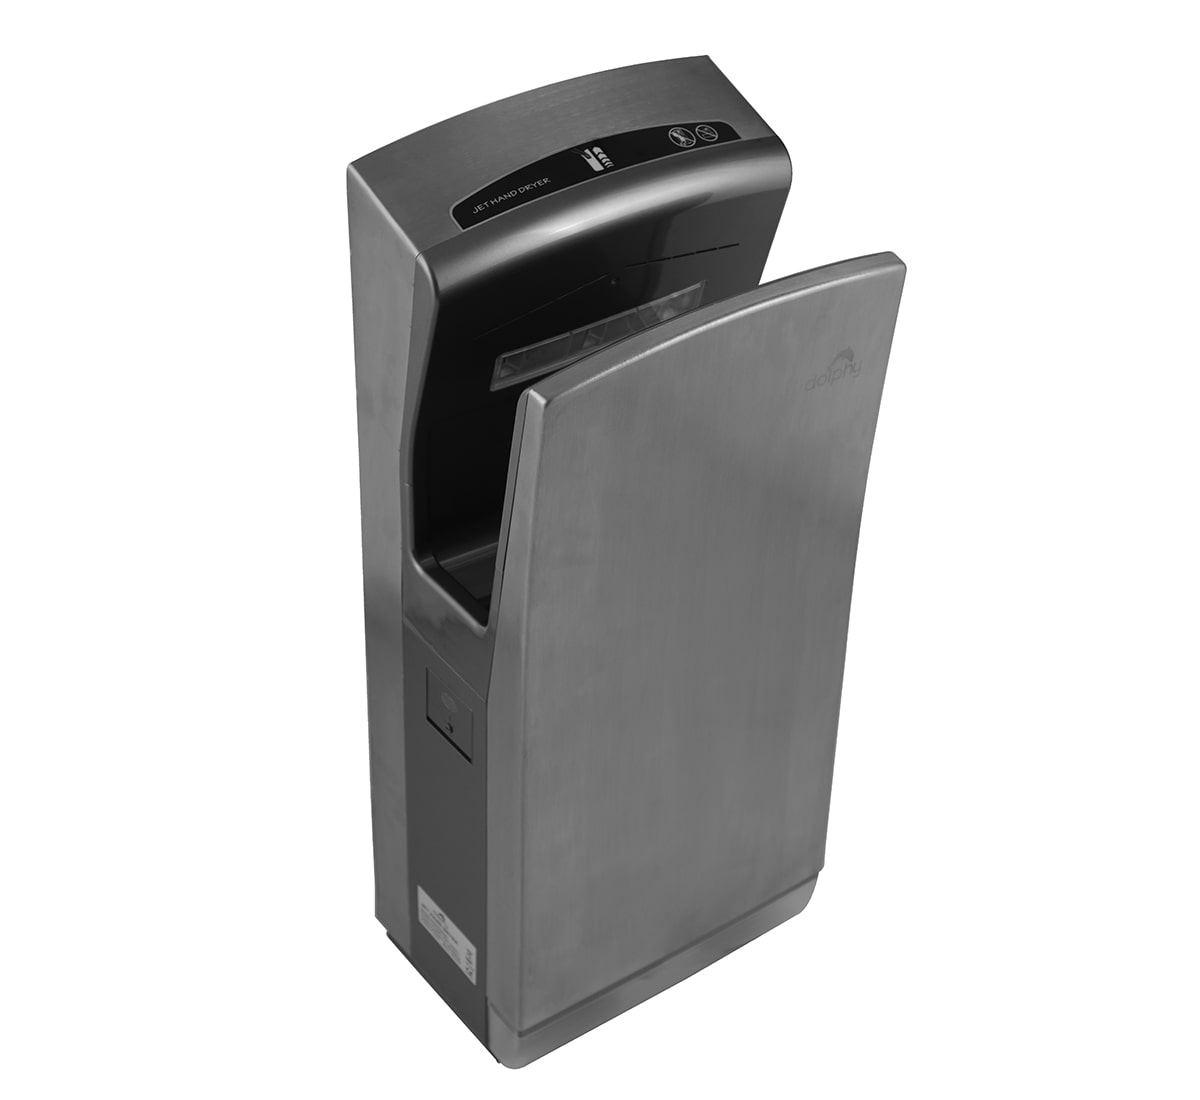 Waterproof hand dryer with brushless motor